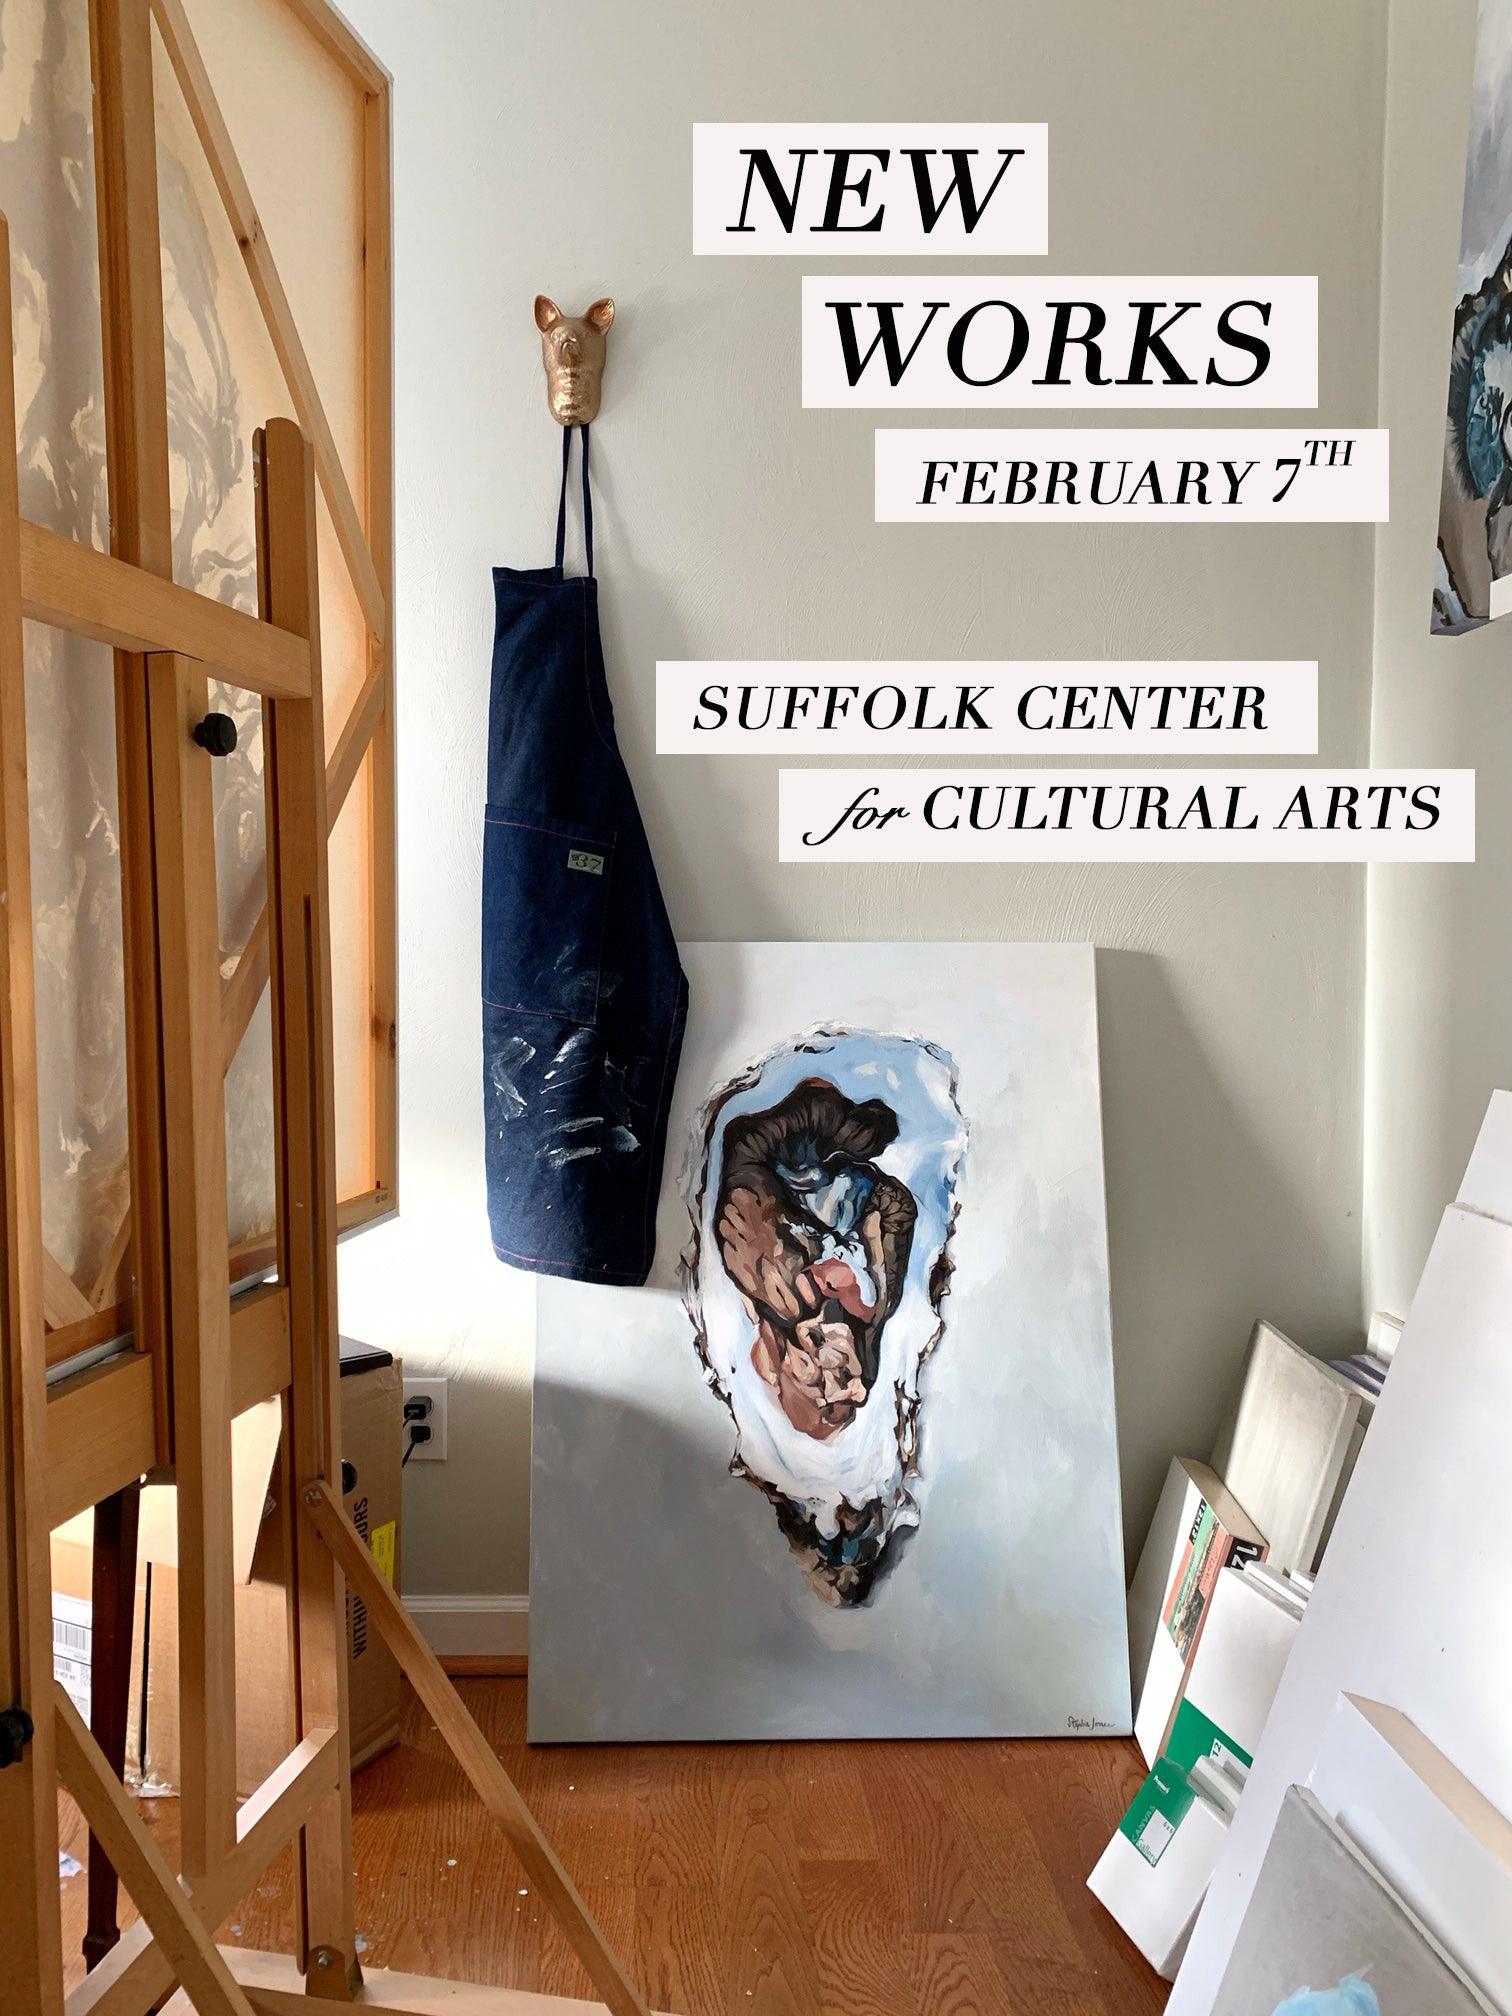 Coastal Conversation: New Gallery Show at the Suffolk Center for Cultural Arts, Feb-March 2019 - Stephie Jones Art